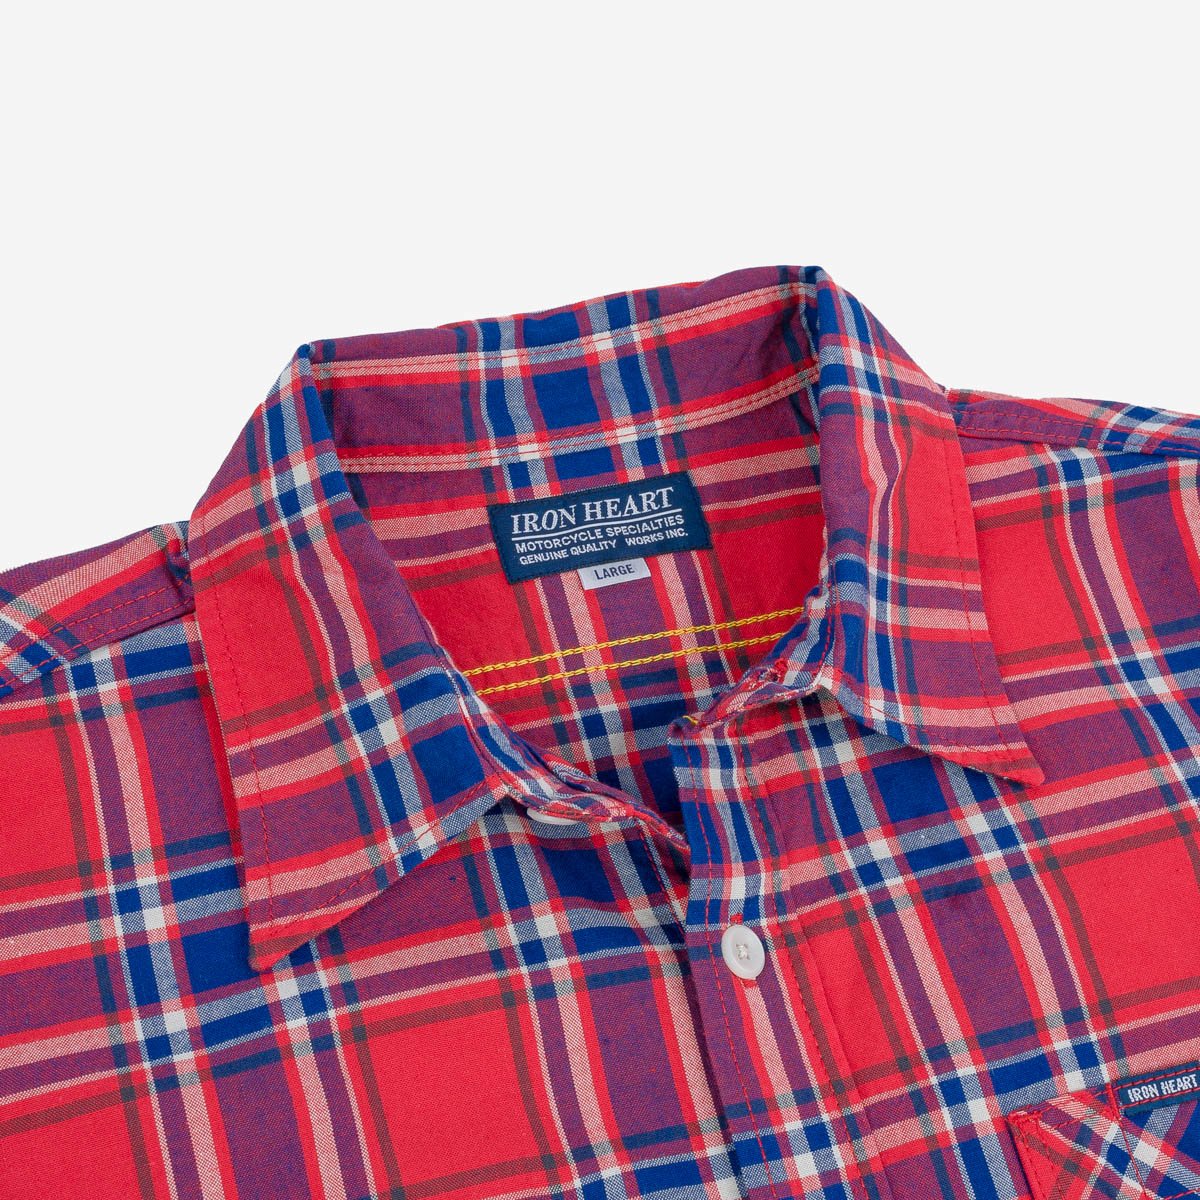 Iron Heart IHSH-356-RED 5oz Selvedge Madras Check Work Shirt - Red